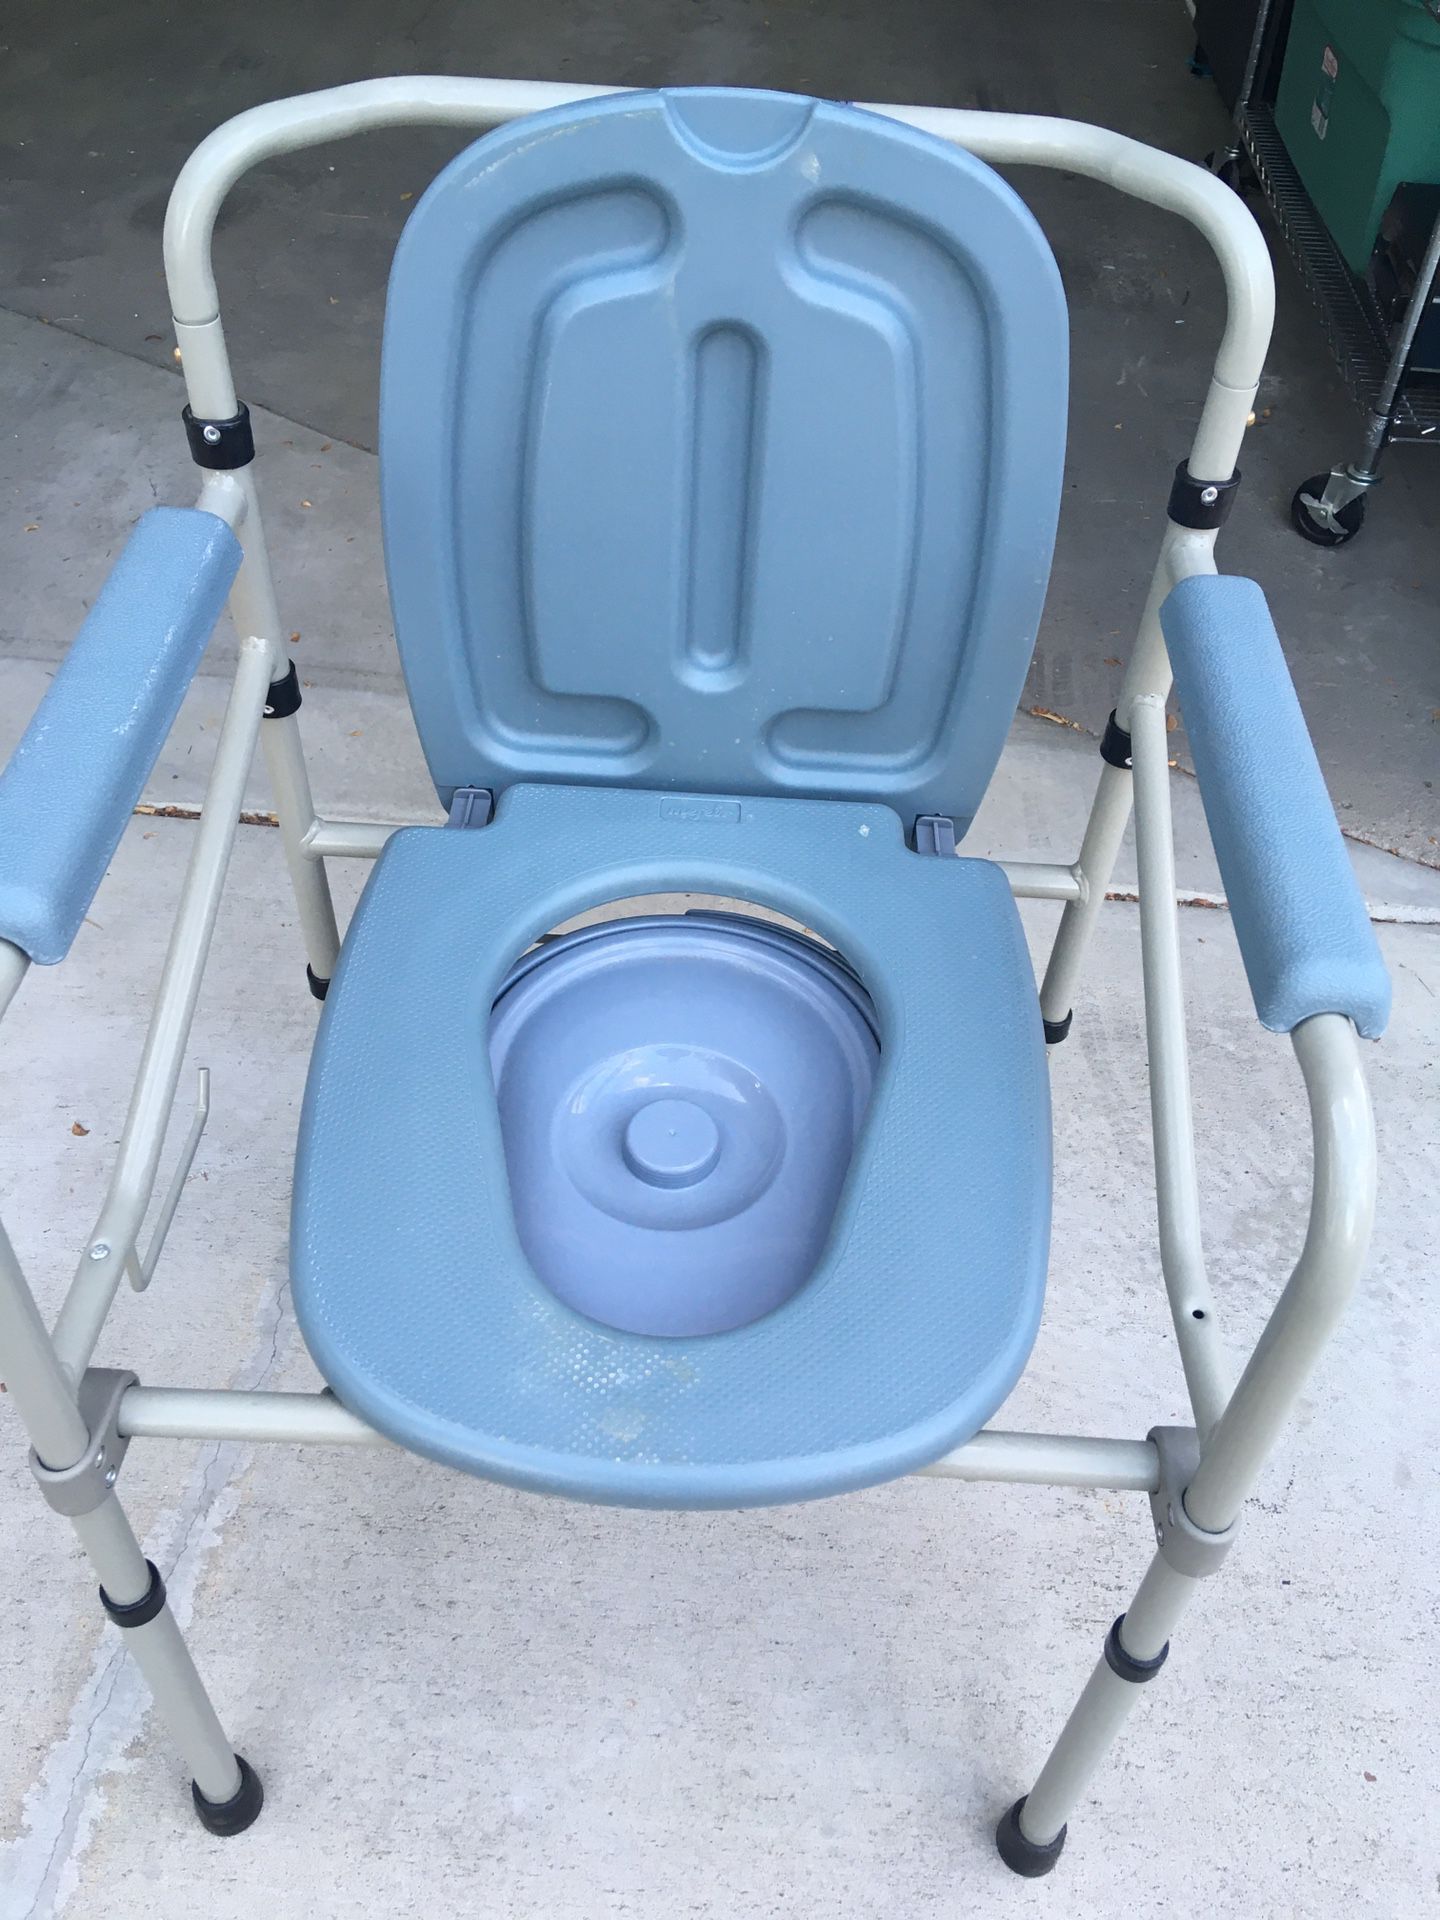 Camping or Handicap Commode Toilet Chair